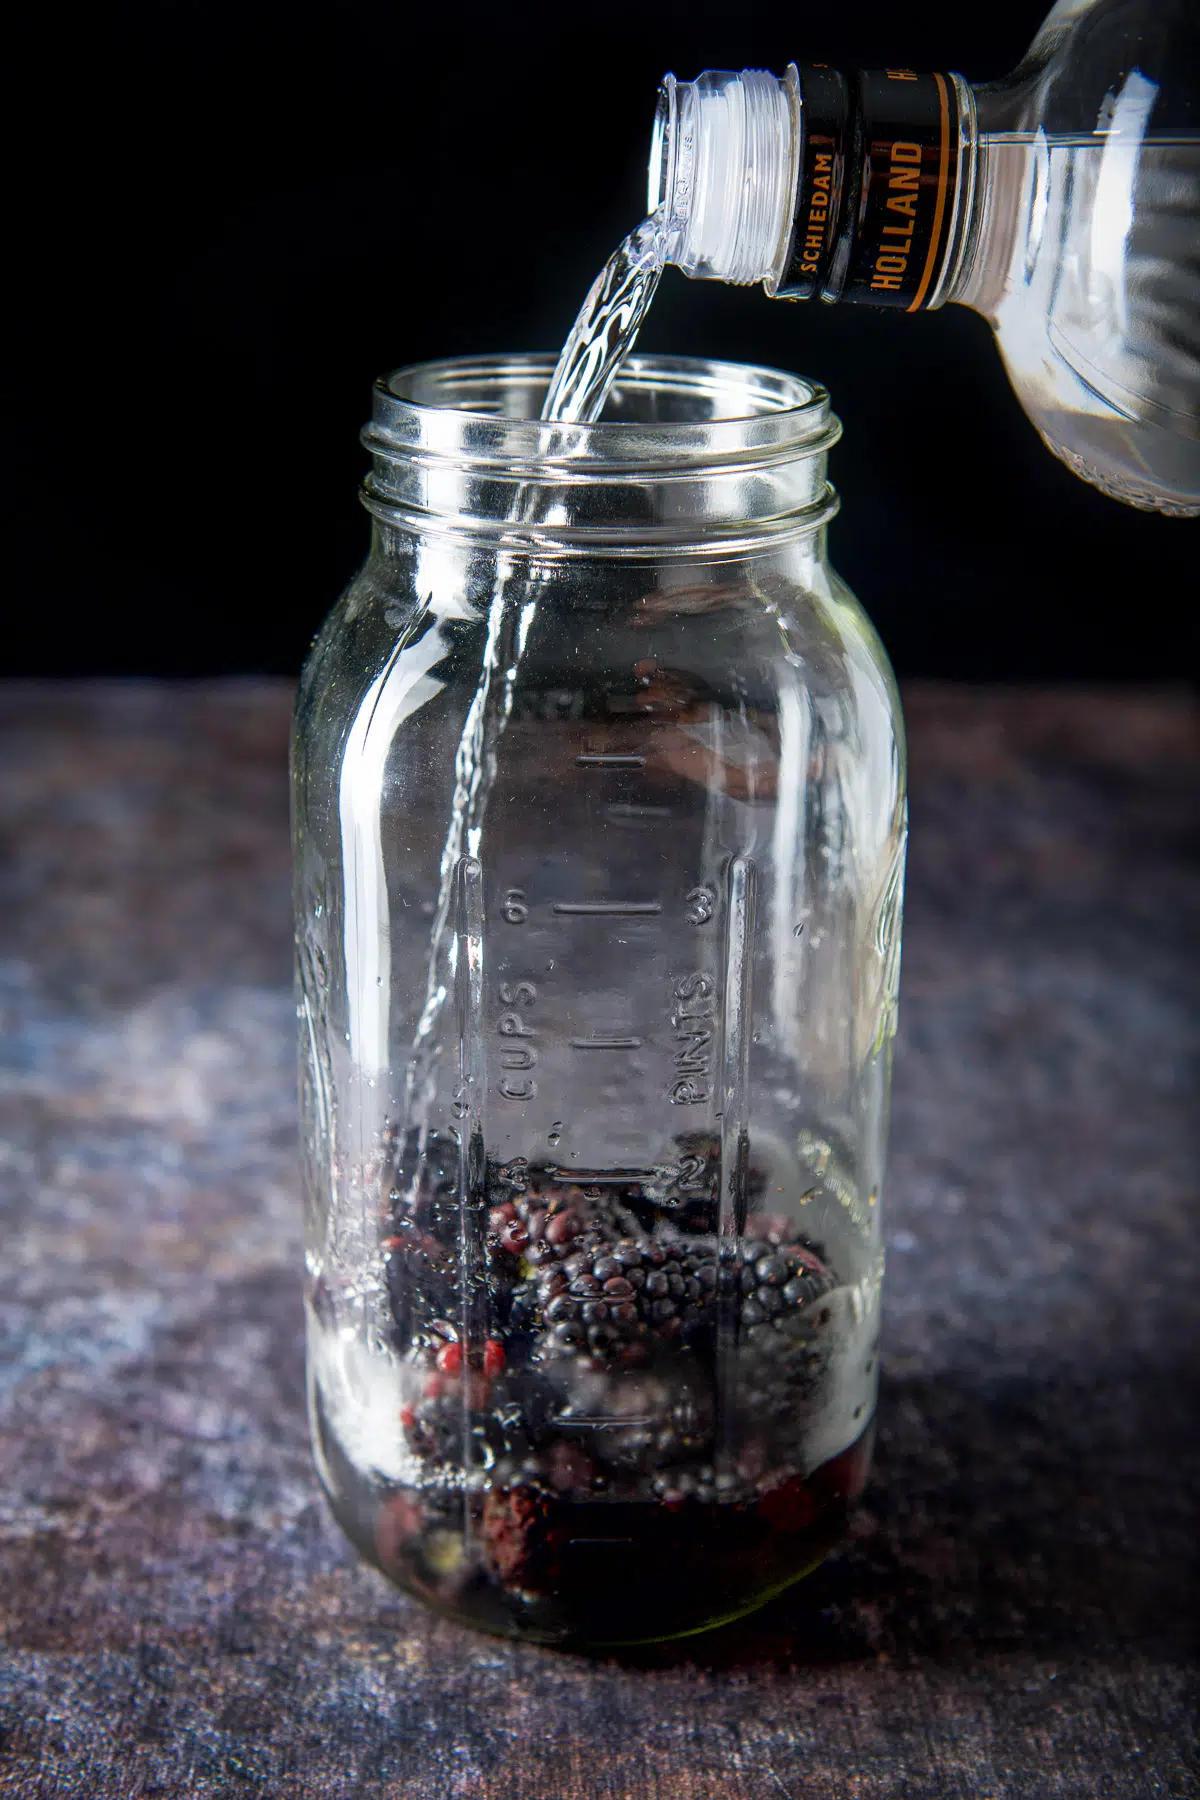 Vodka being poured into the jar of blackberries